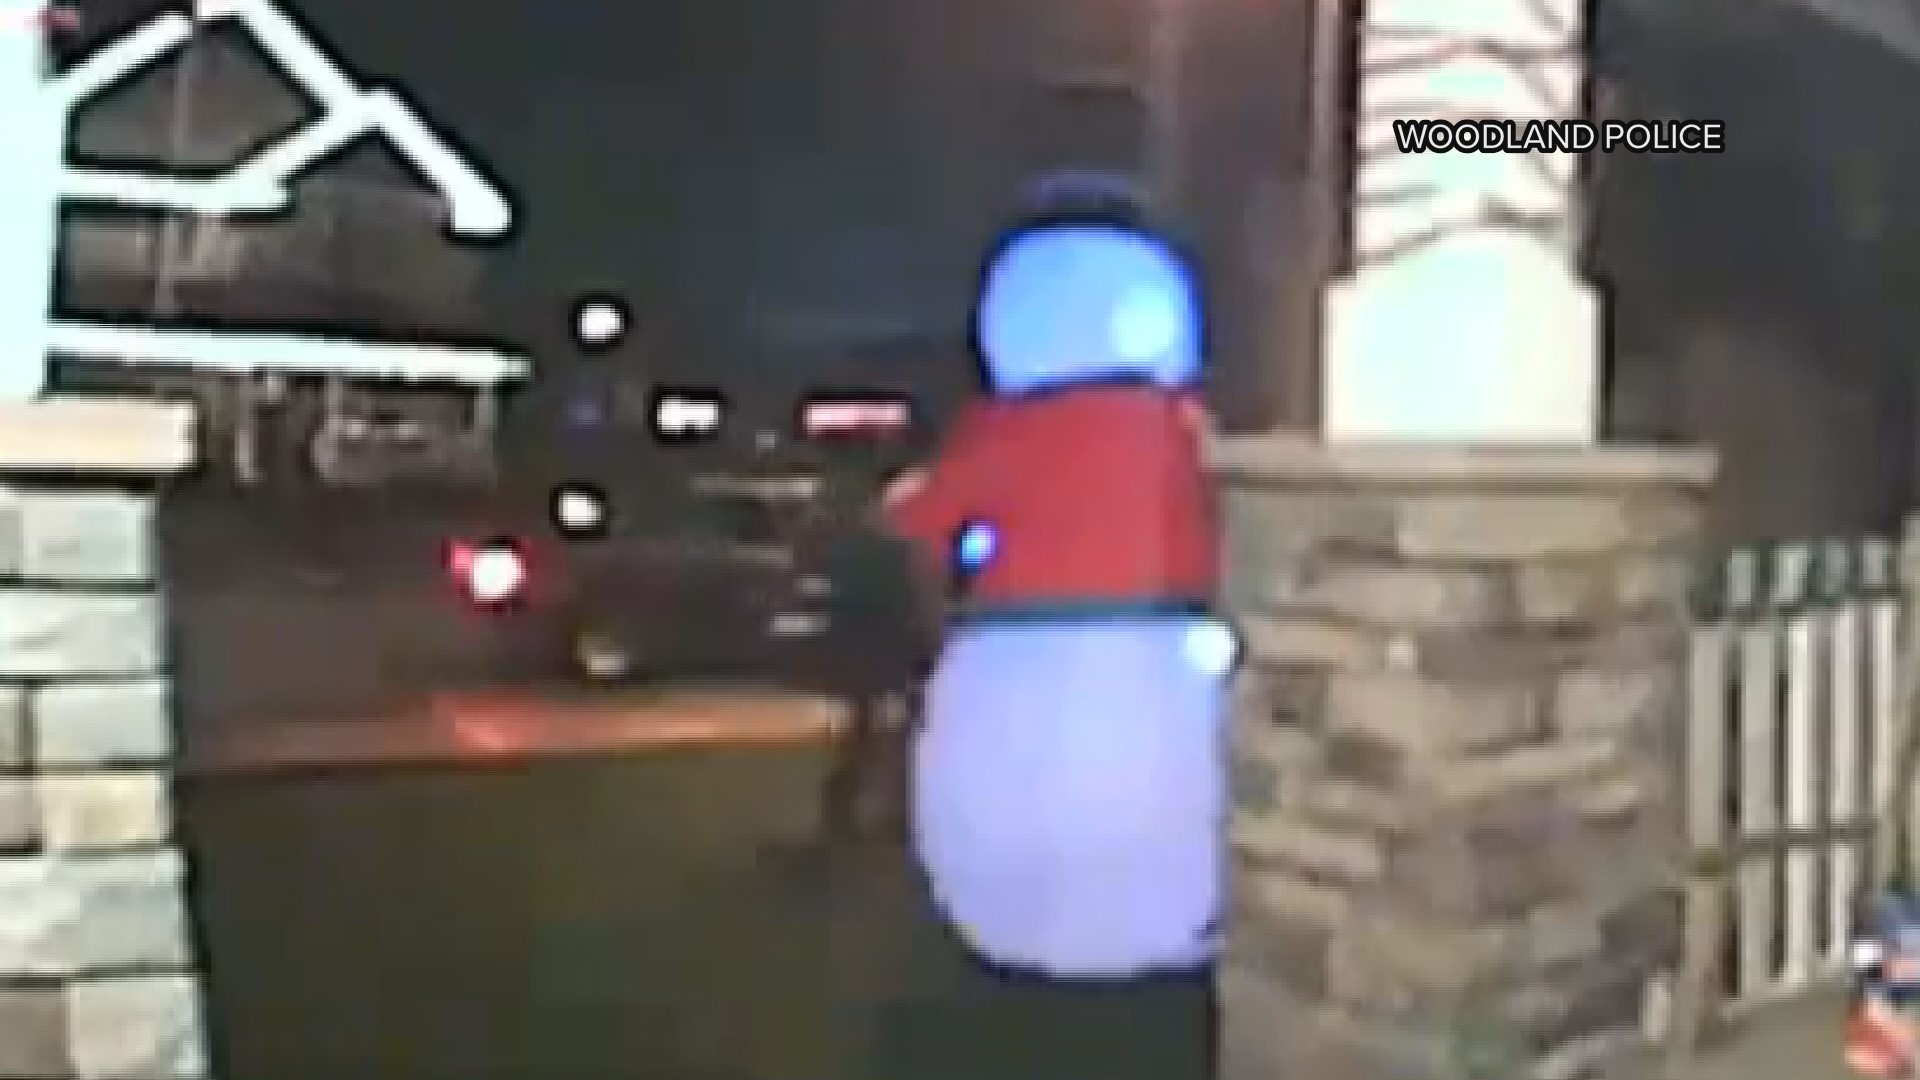 Ring camera video shows a person stab a blow-up snowman in a front yard. Police received several reports of decoration vandalism Saturday night.